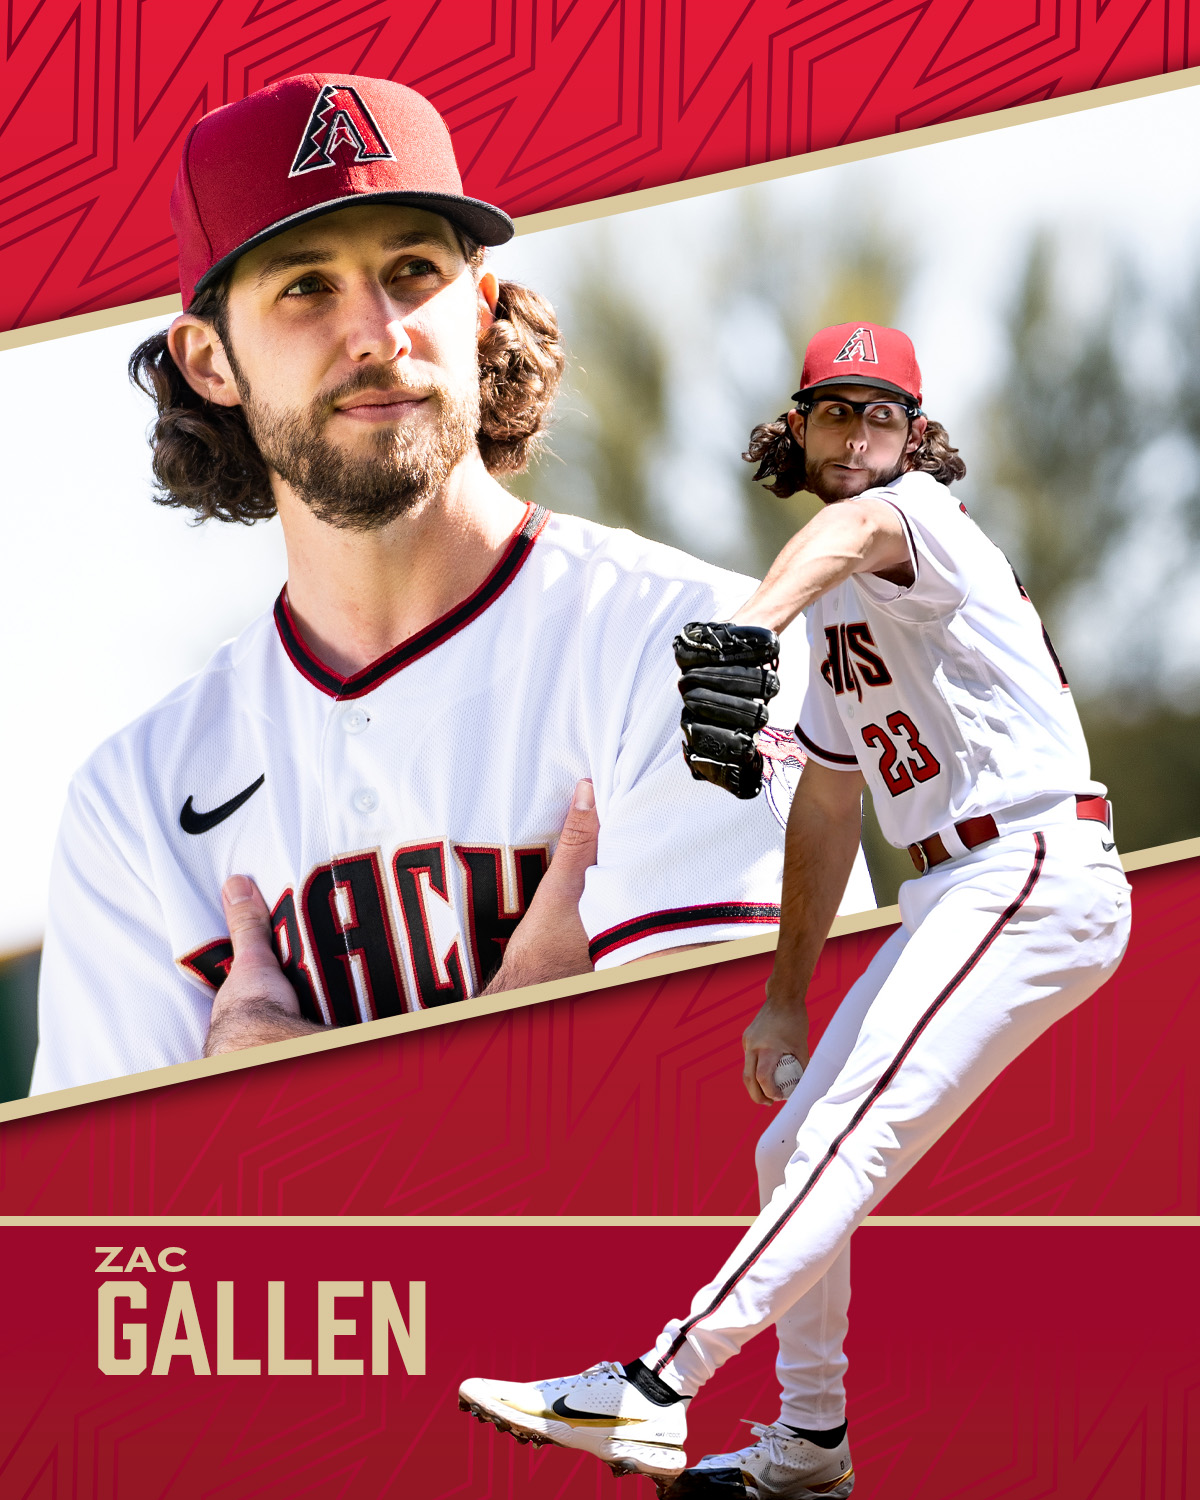 Zac Gallen named NL pitcher of the month for August - AZ Snake Pit